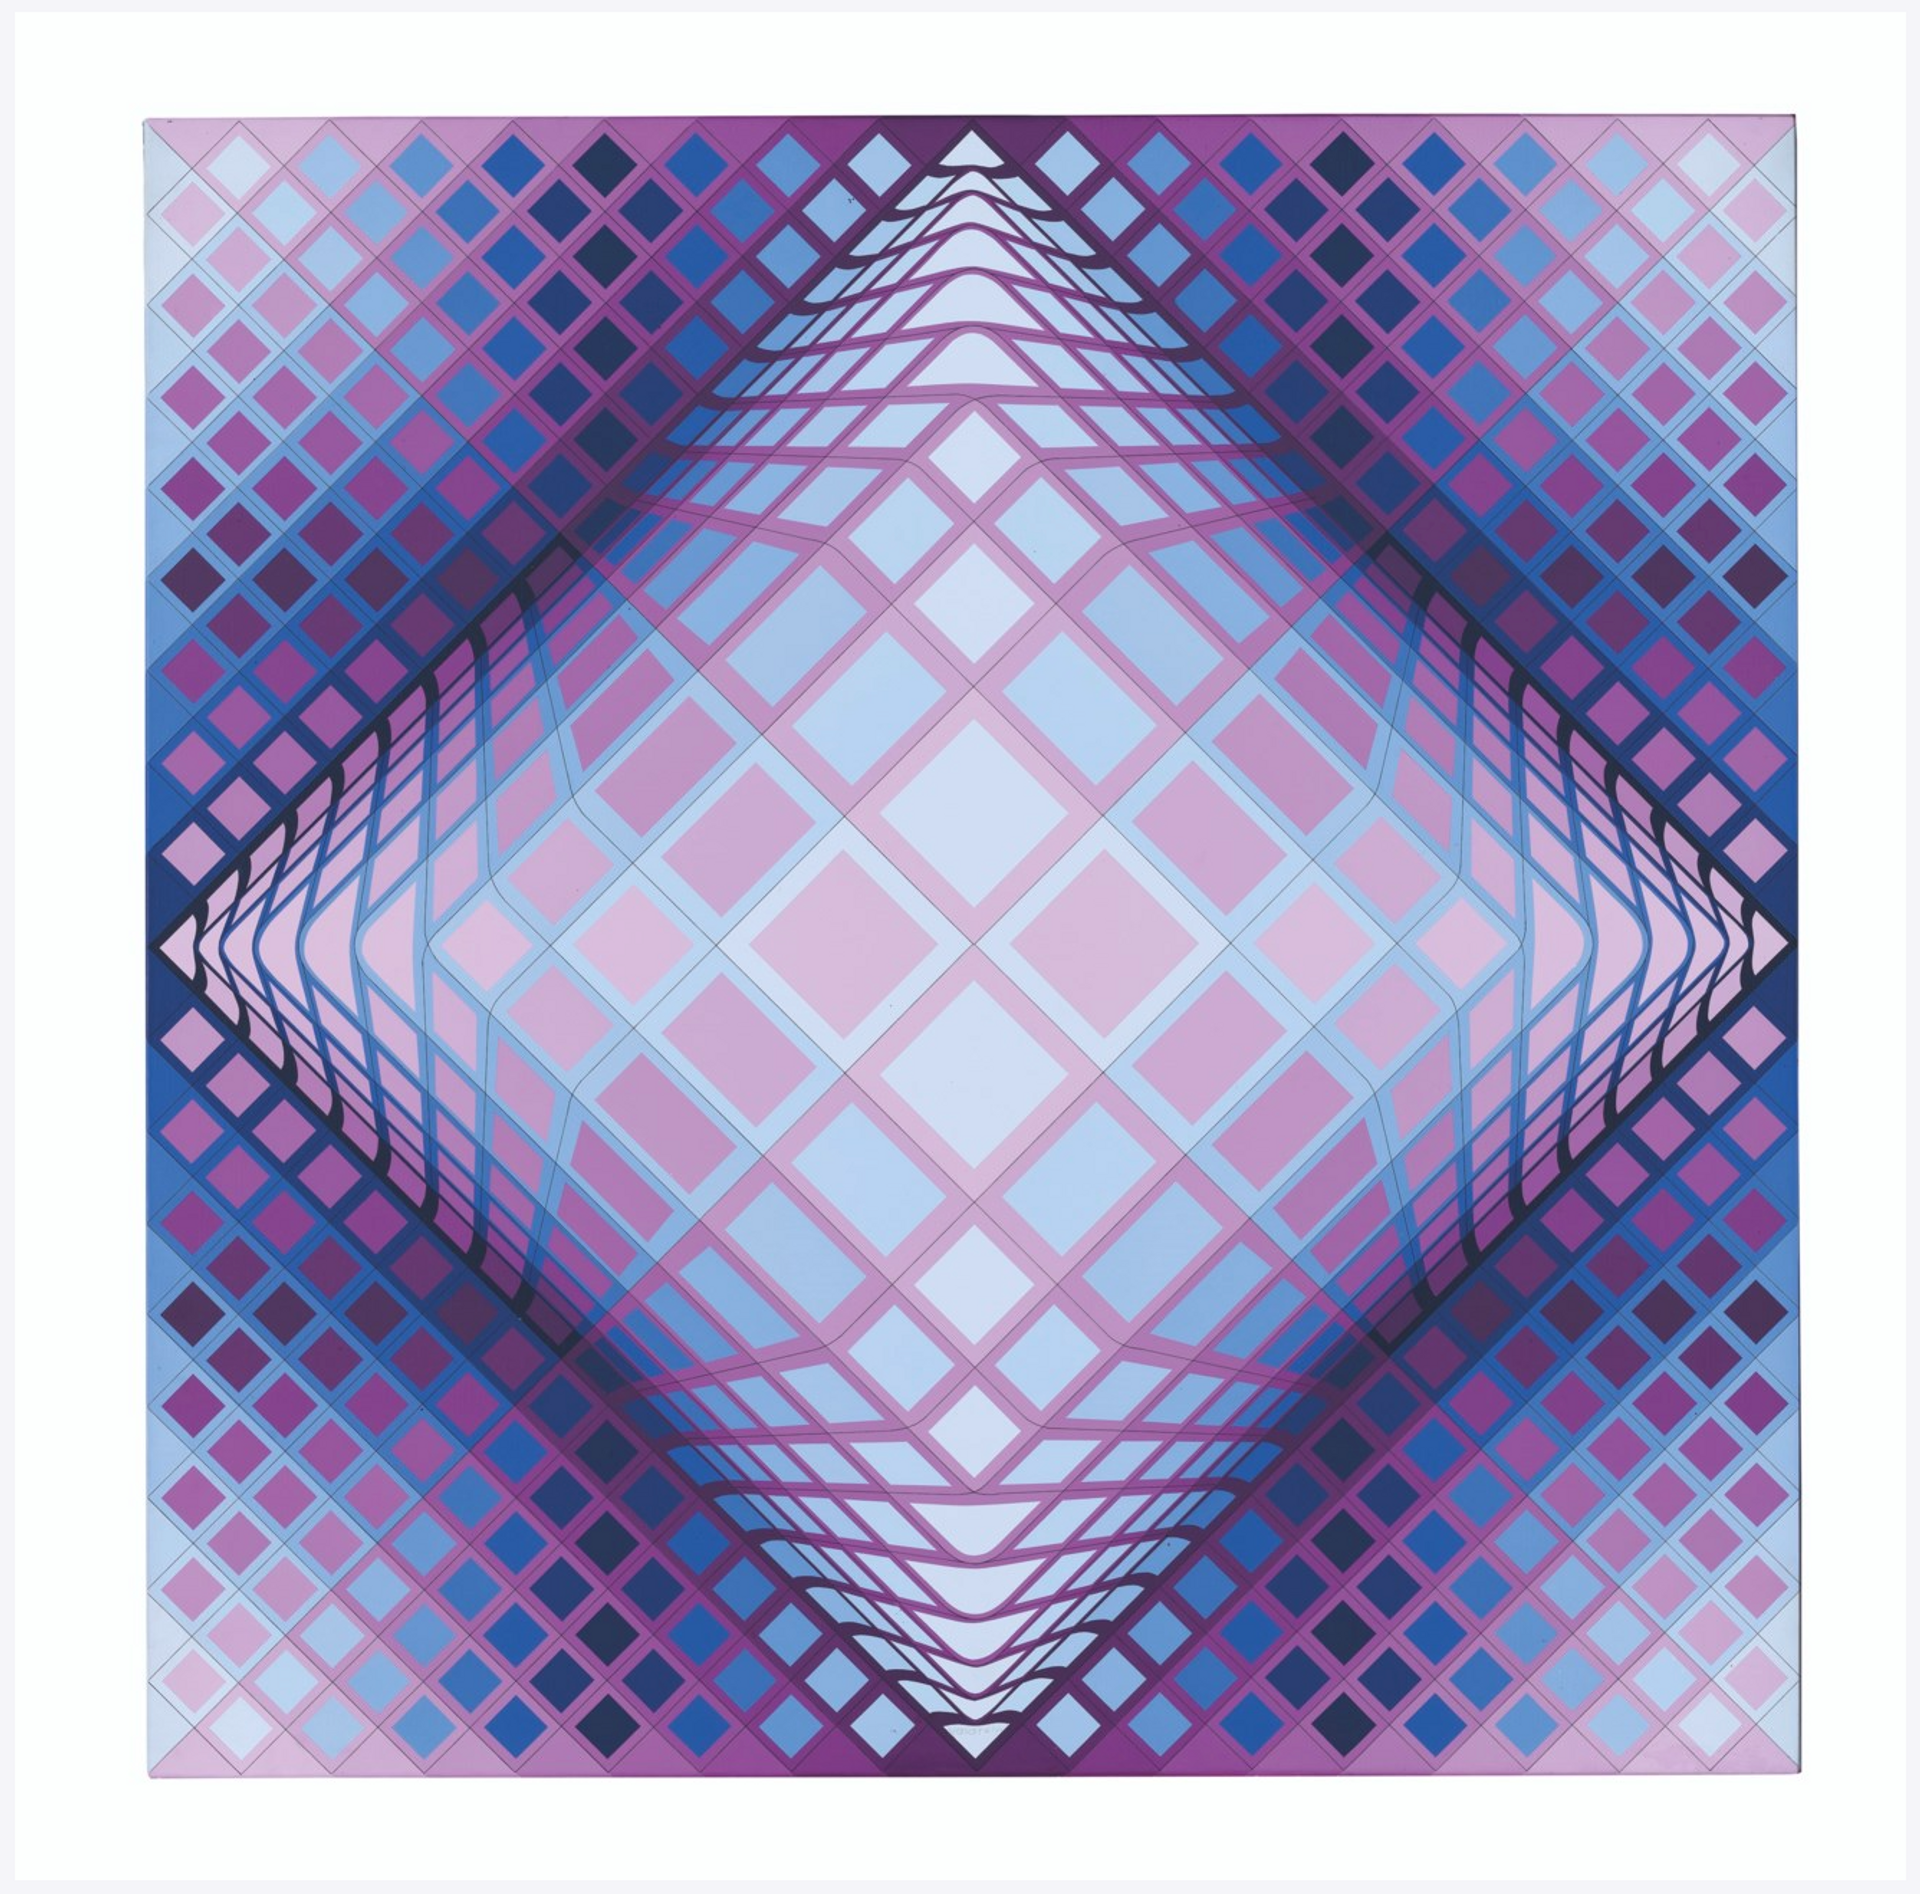 a square optical illusion artwork composed of diamond shapes in varying hiues of purple and blue that forms a large diamond in the centre.